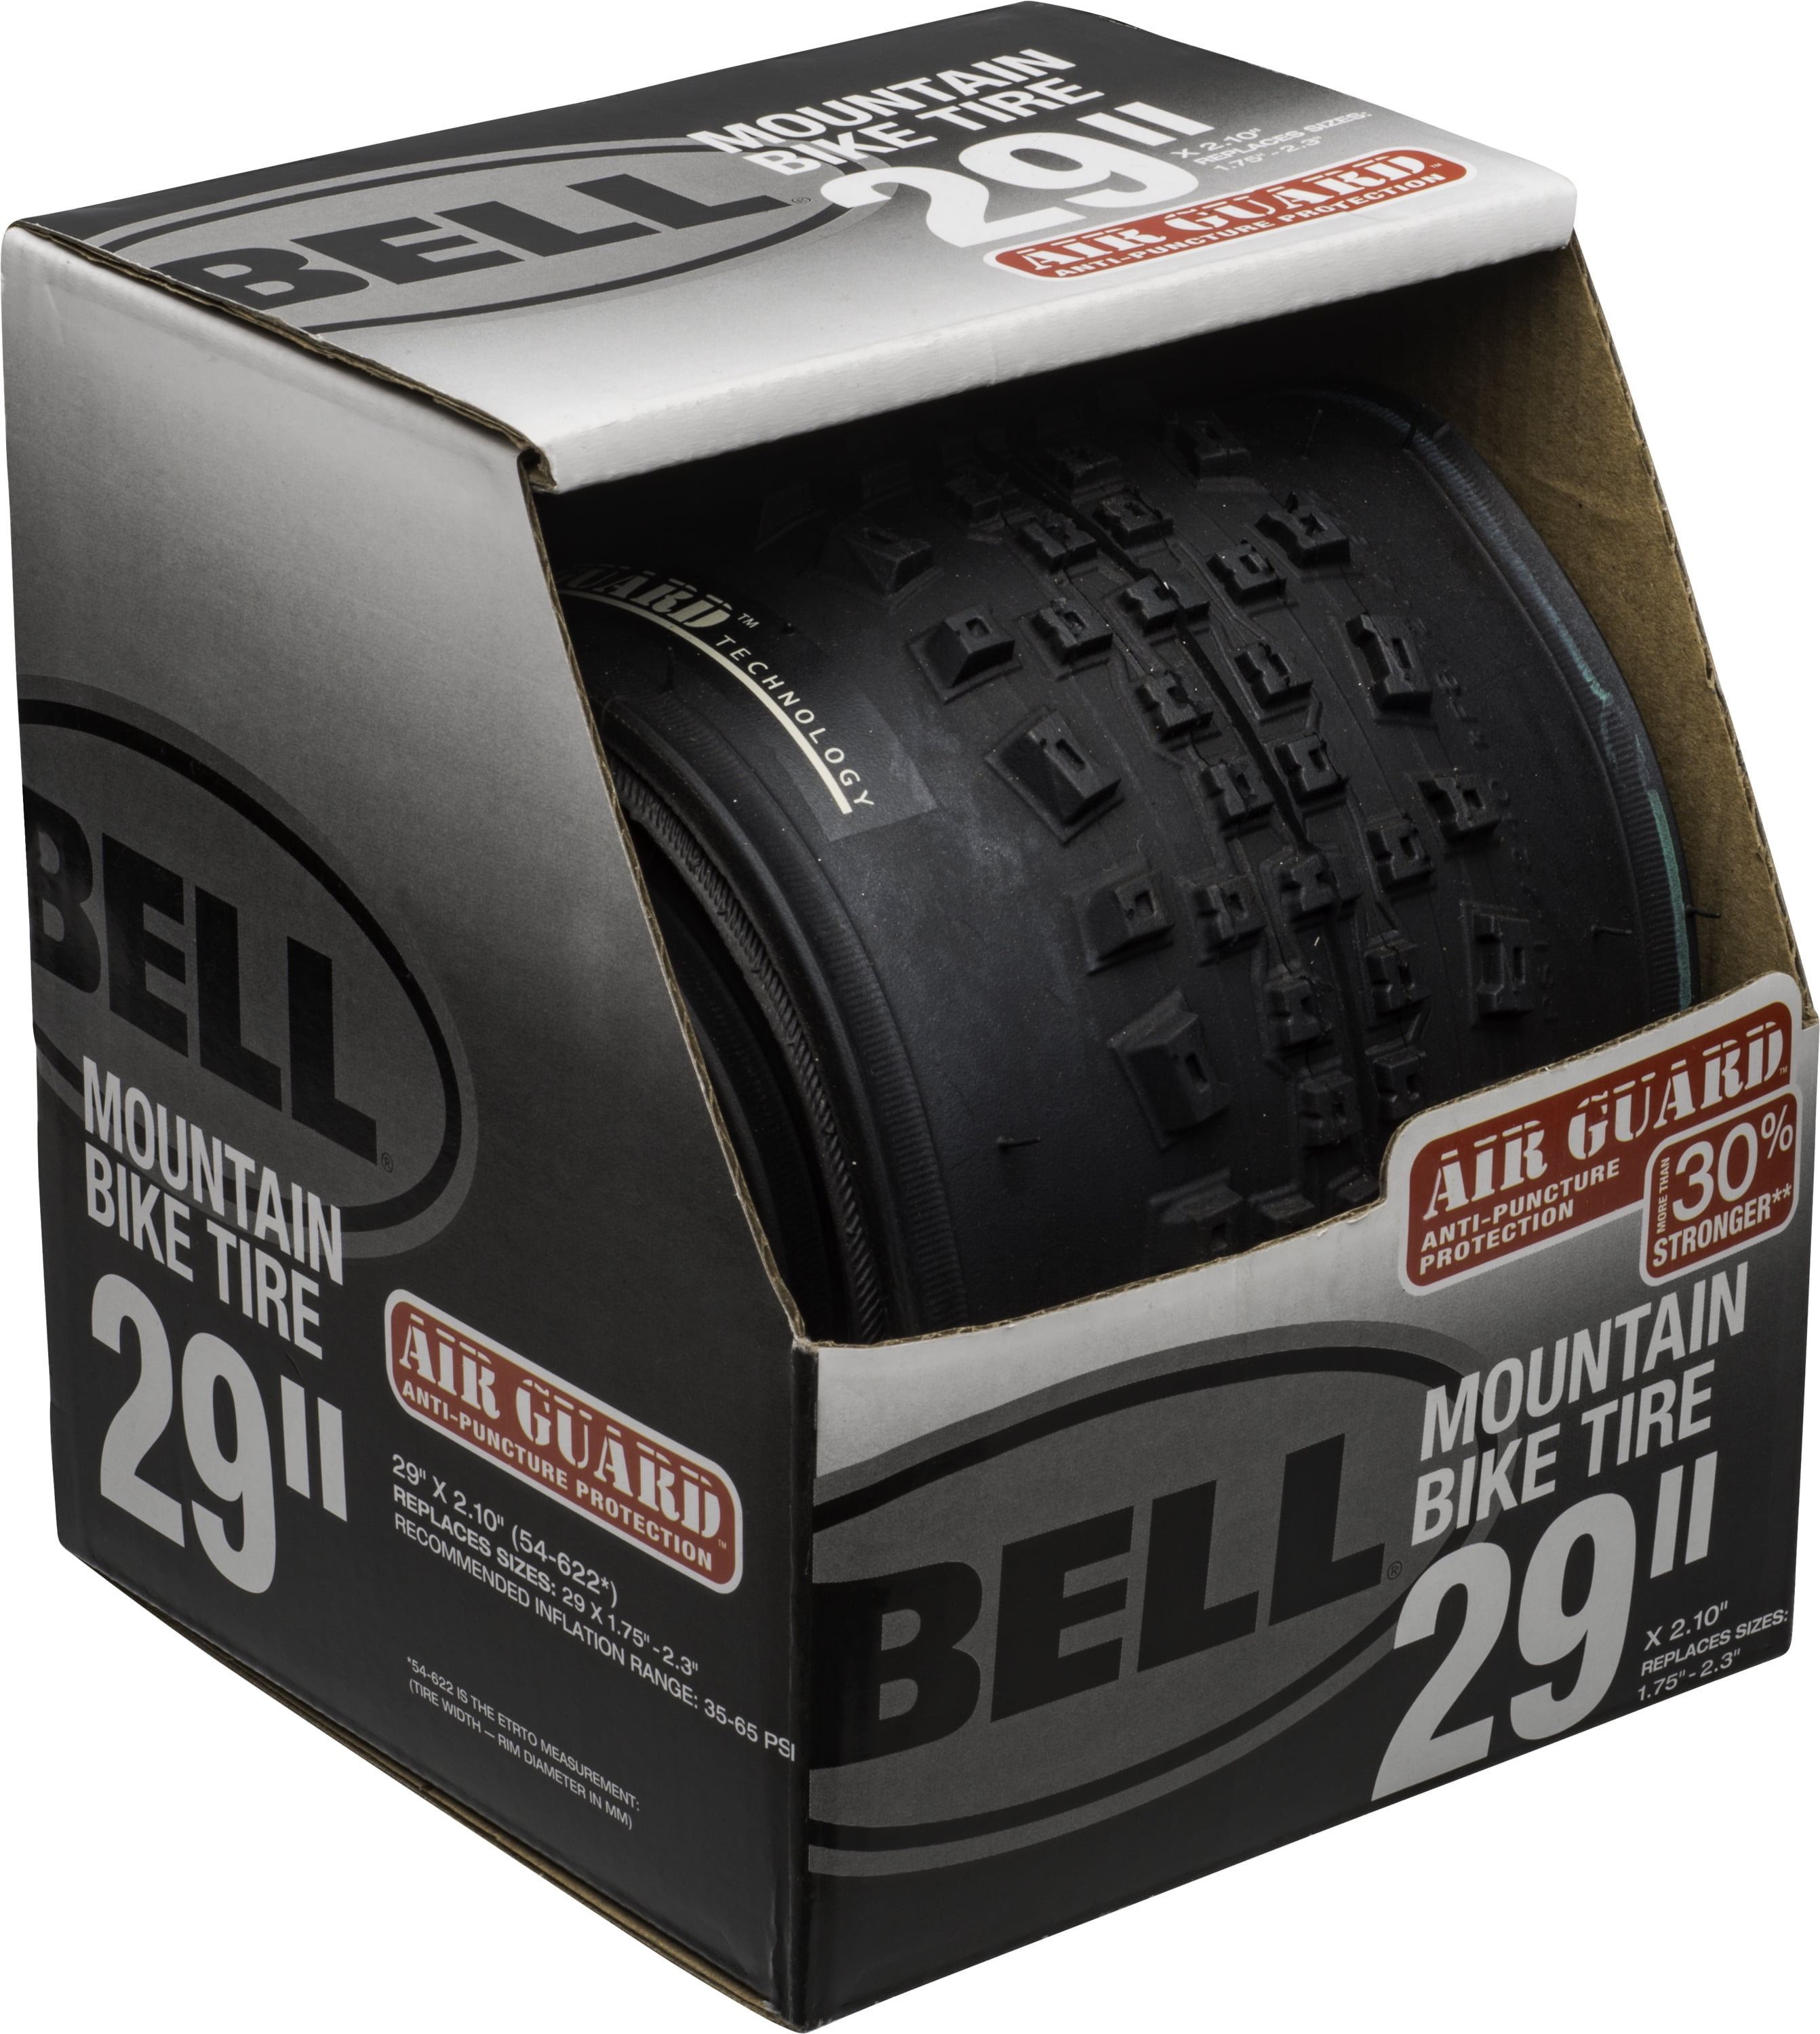 BELL MOUNTAIN BIKE TIRE 29" x 2.10" AIR GUARD ANTI PUNCTURE PROTECTION! 2 pack 